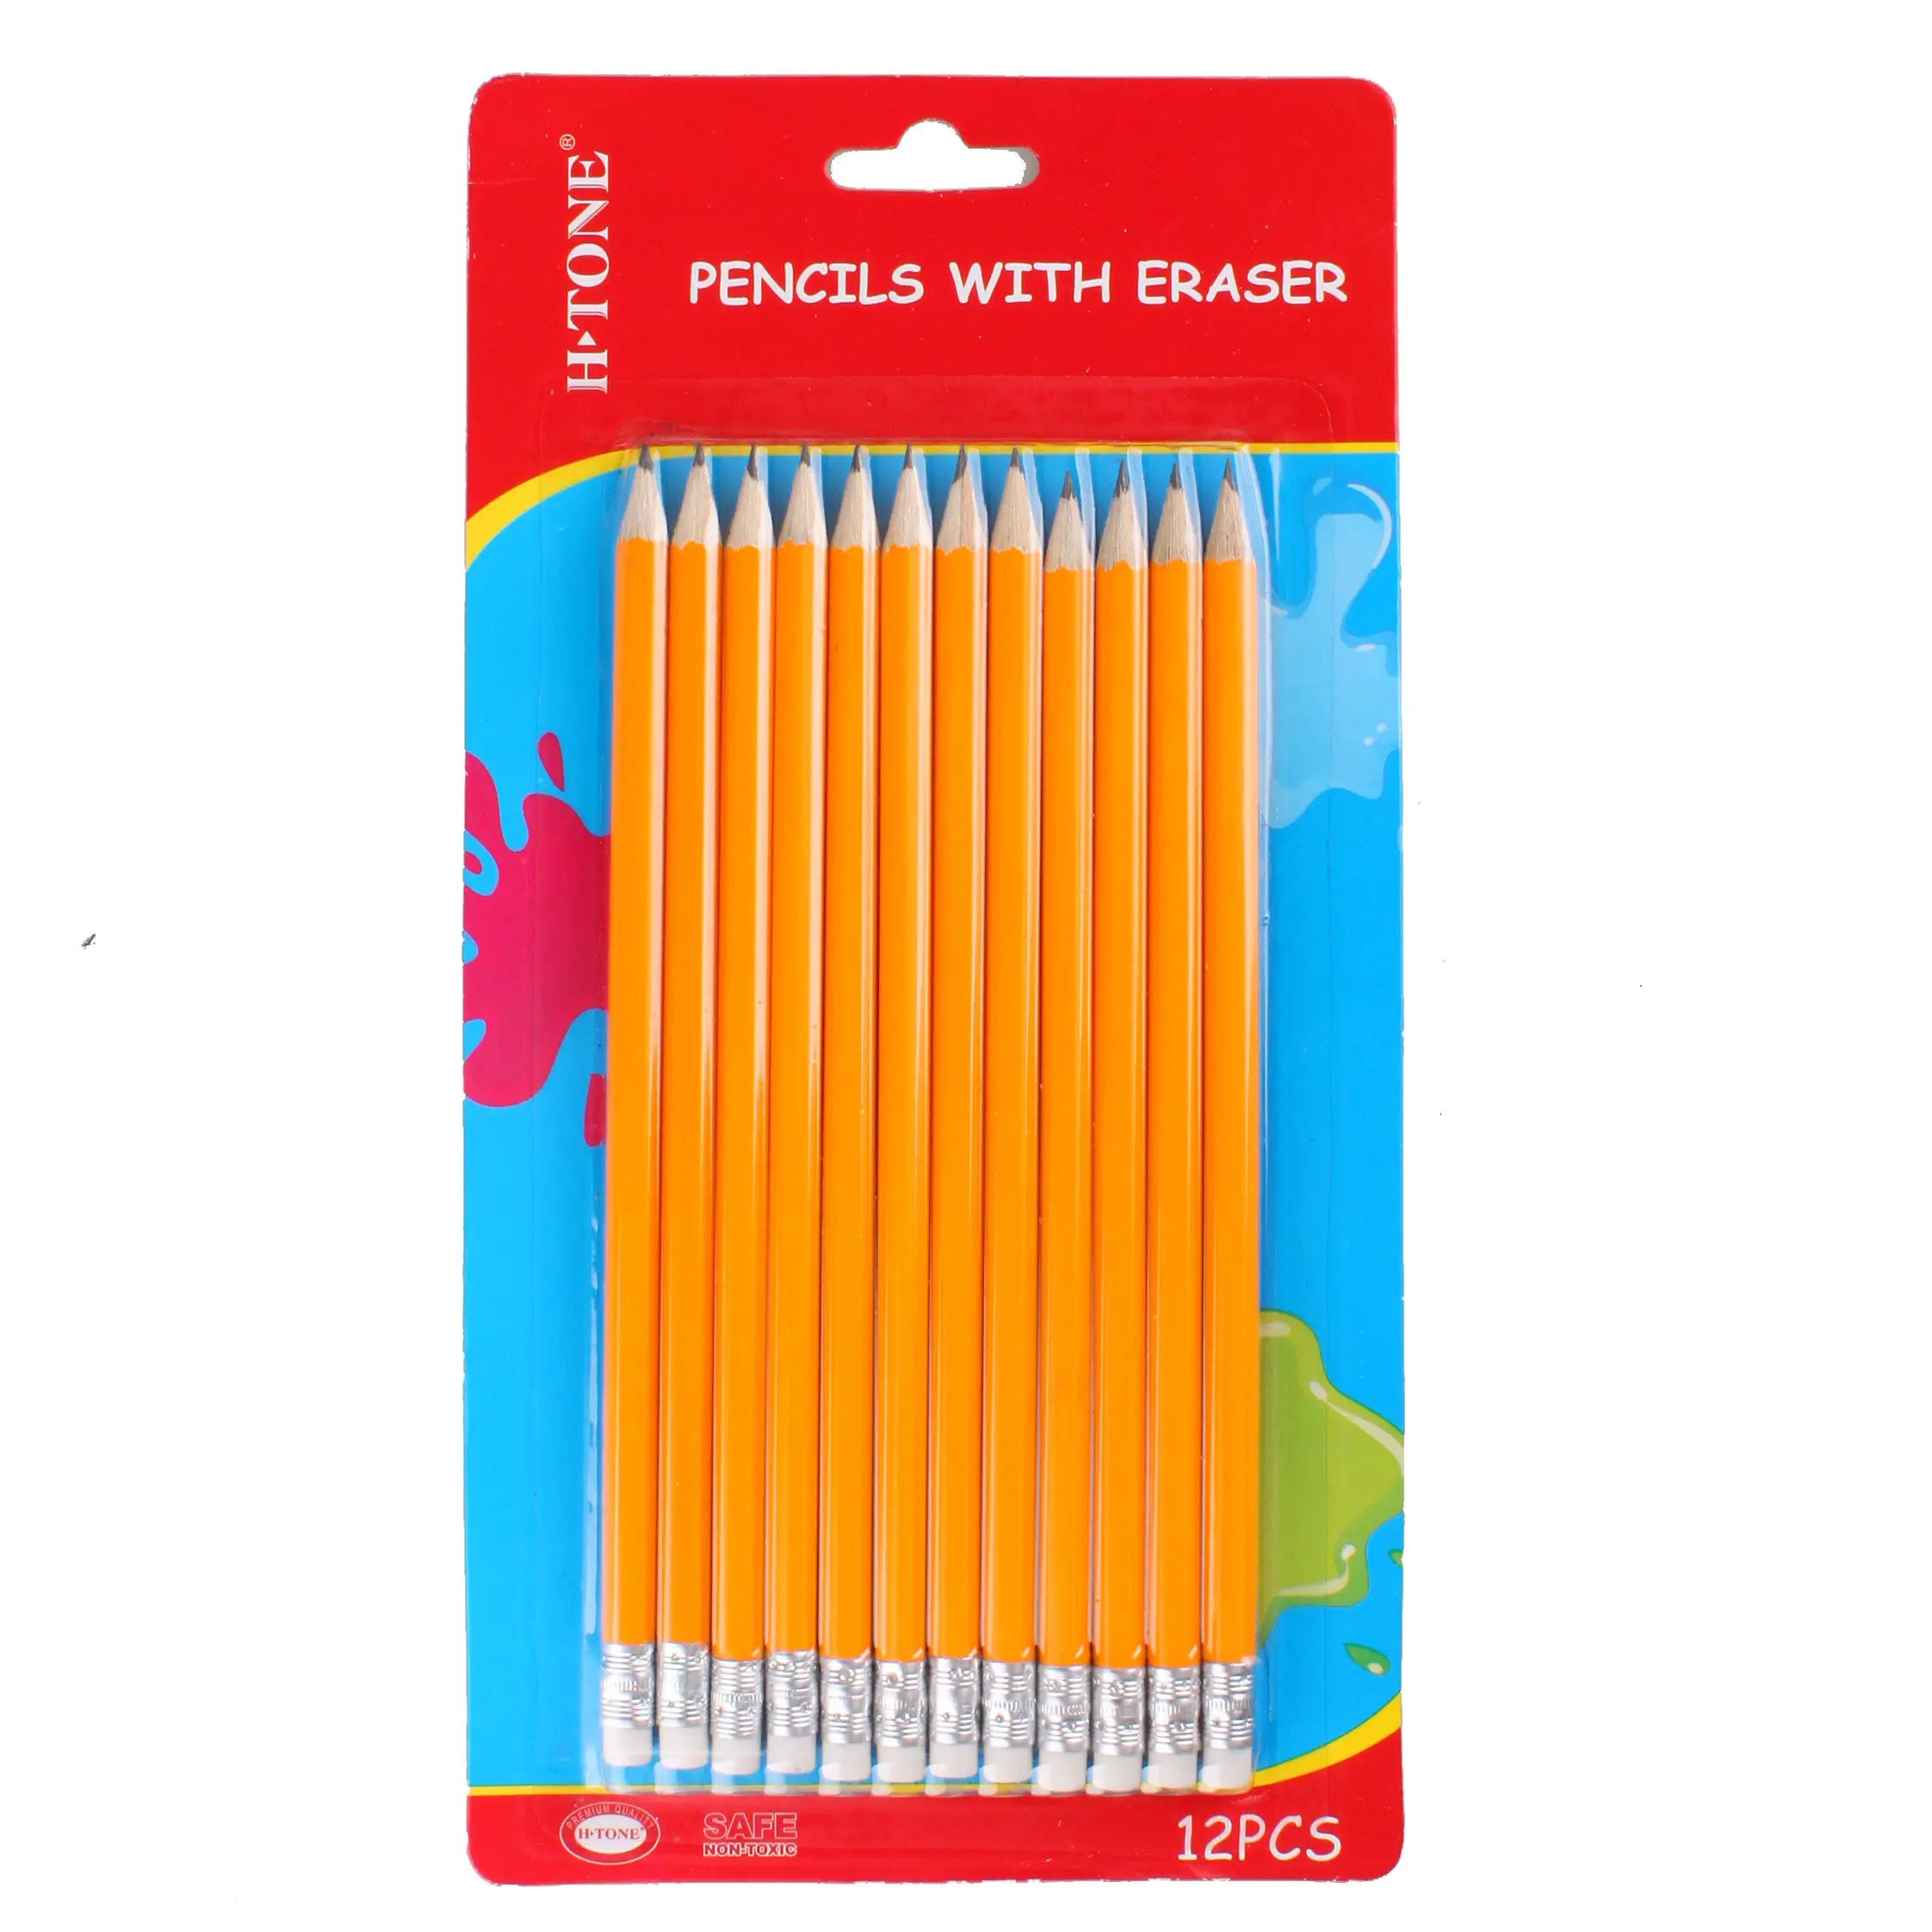 7''High quality yellow pencil with eraser for students HB pencil